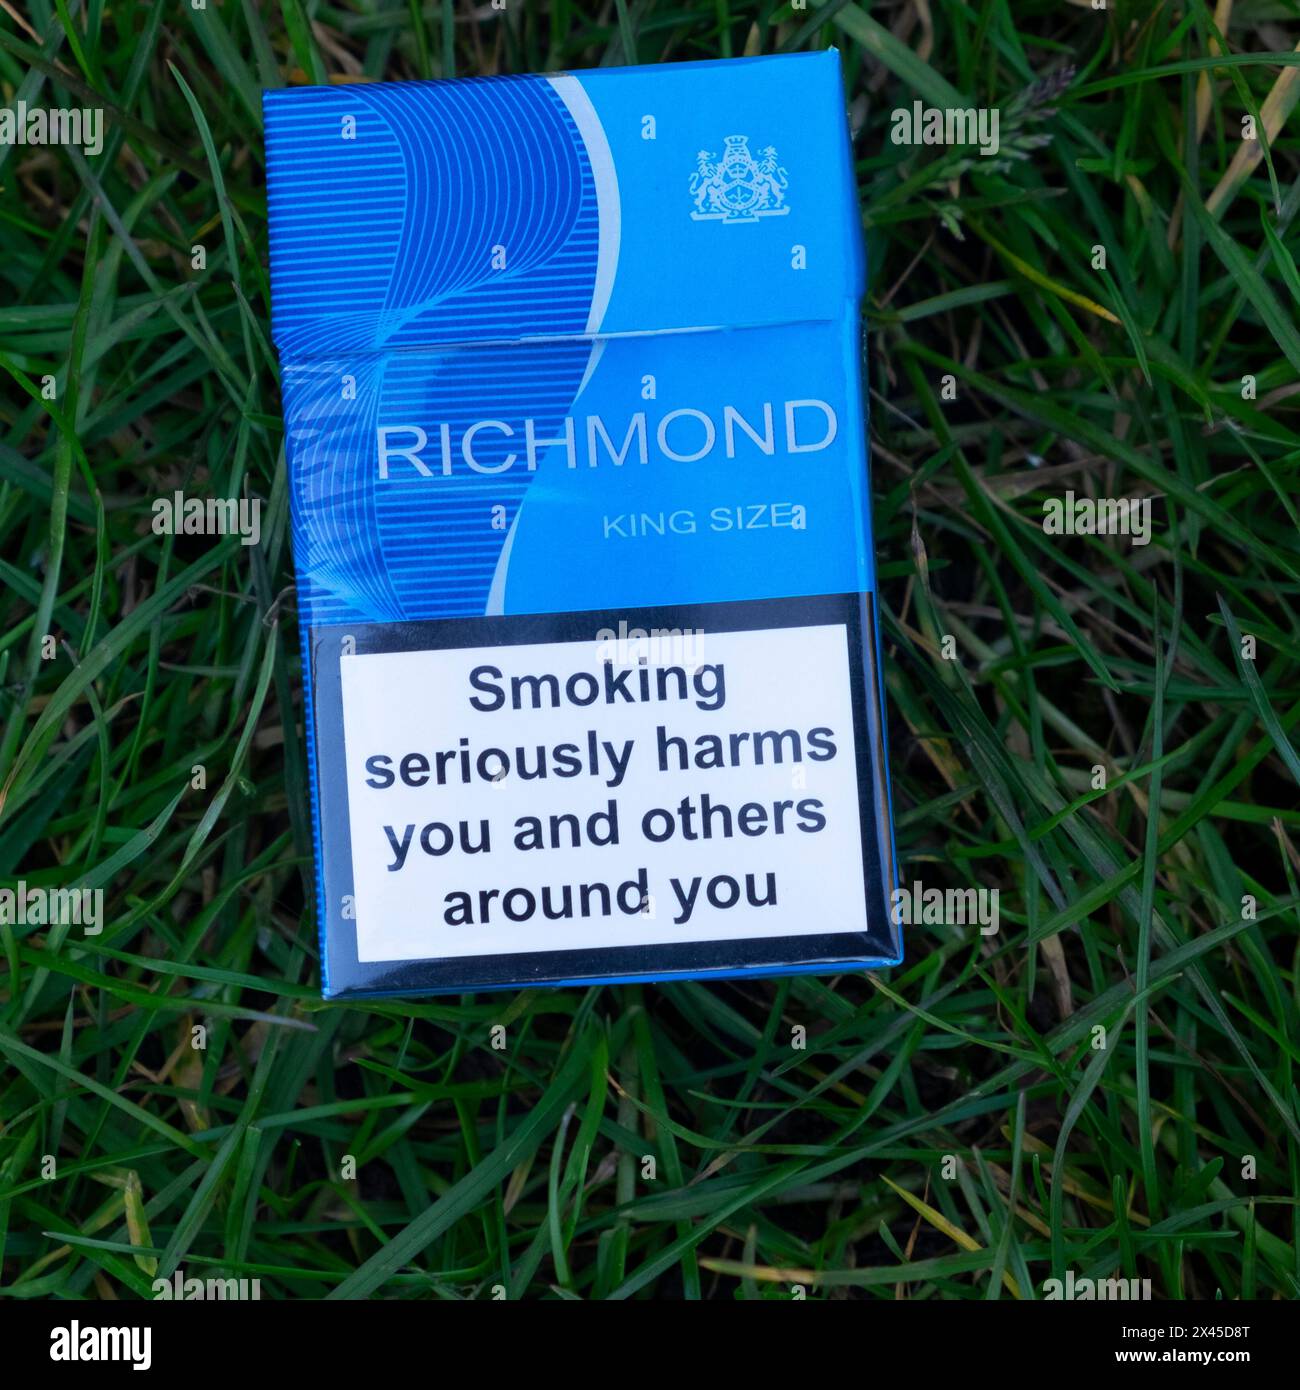 Packet of Richmond tobacco cigarettes cigarette health warning 'Smoking seriously harms you and others around you' on grass background Britain UK 2024 Stock Photo